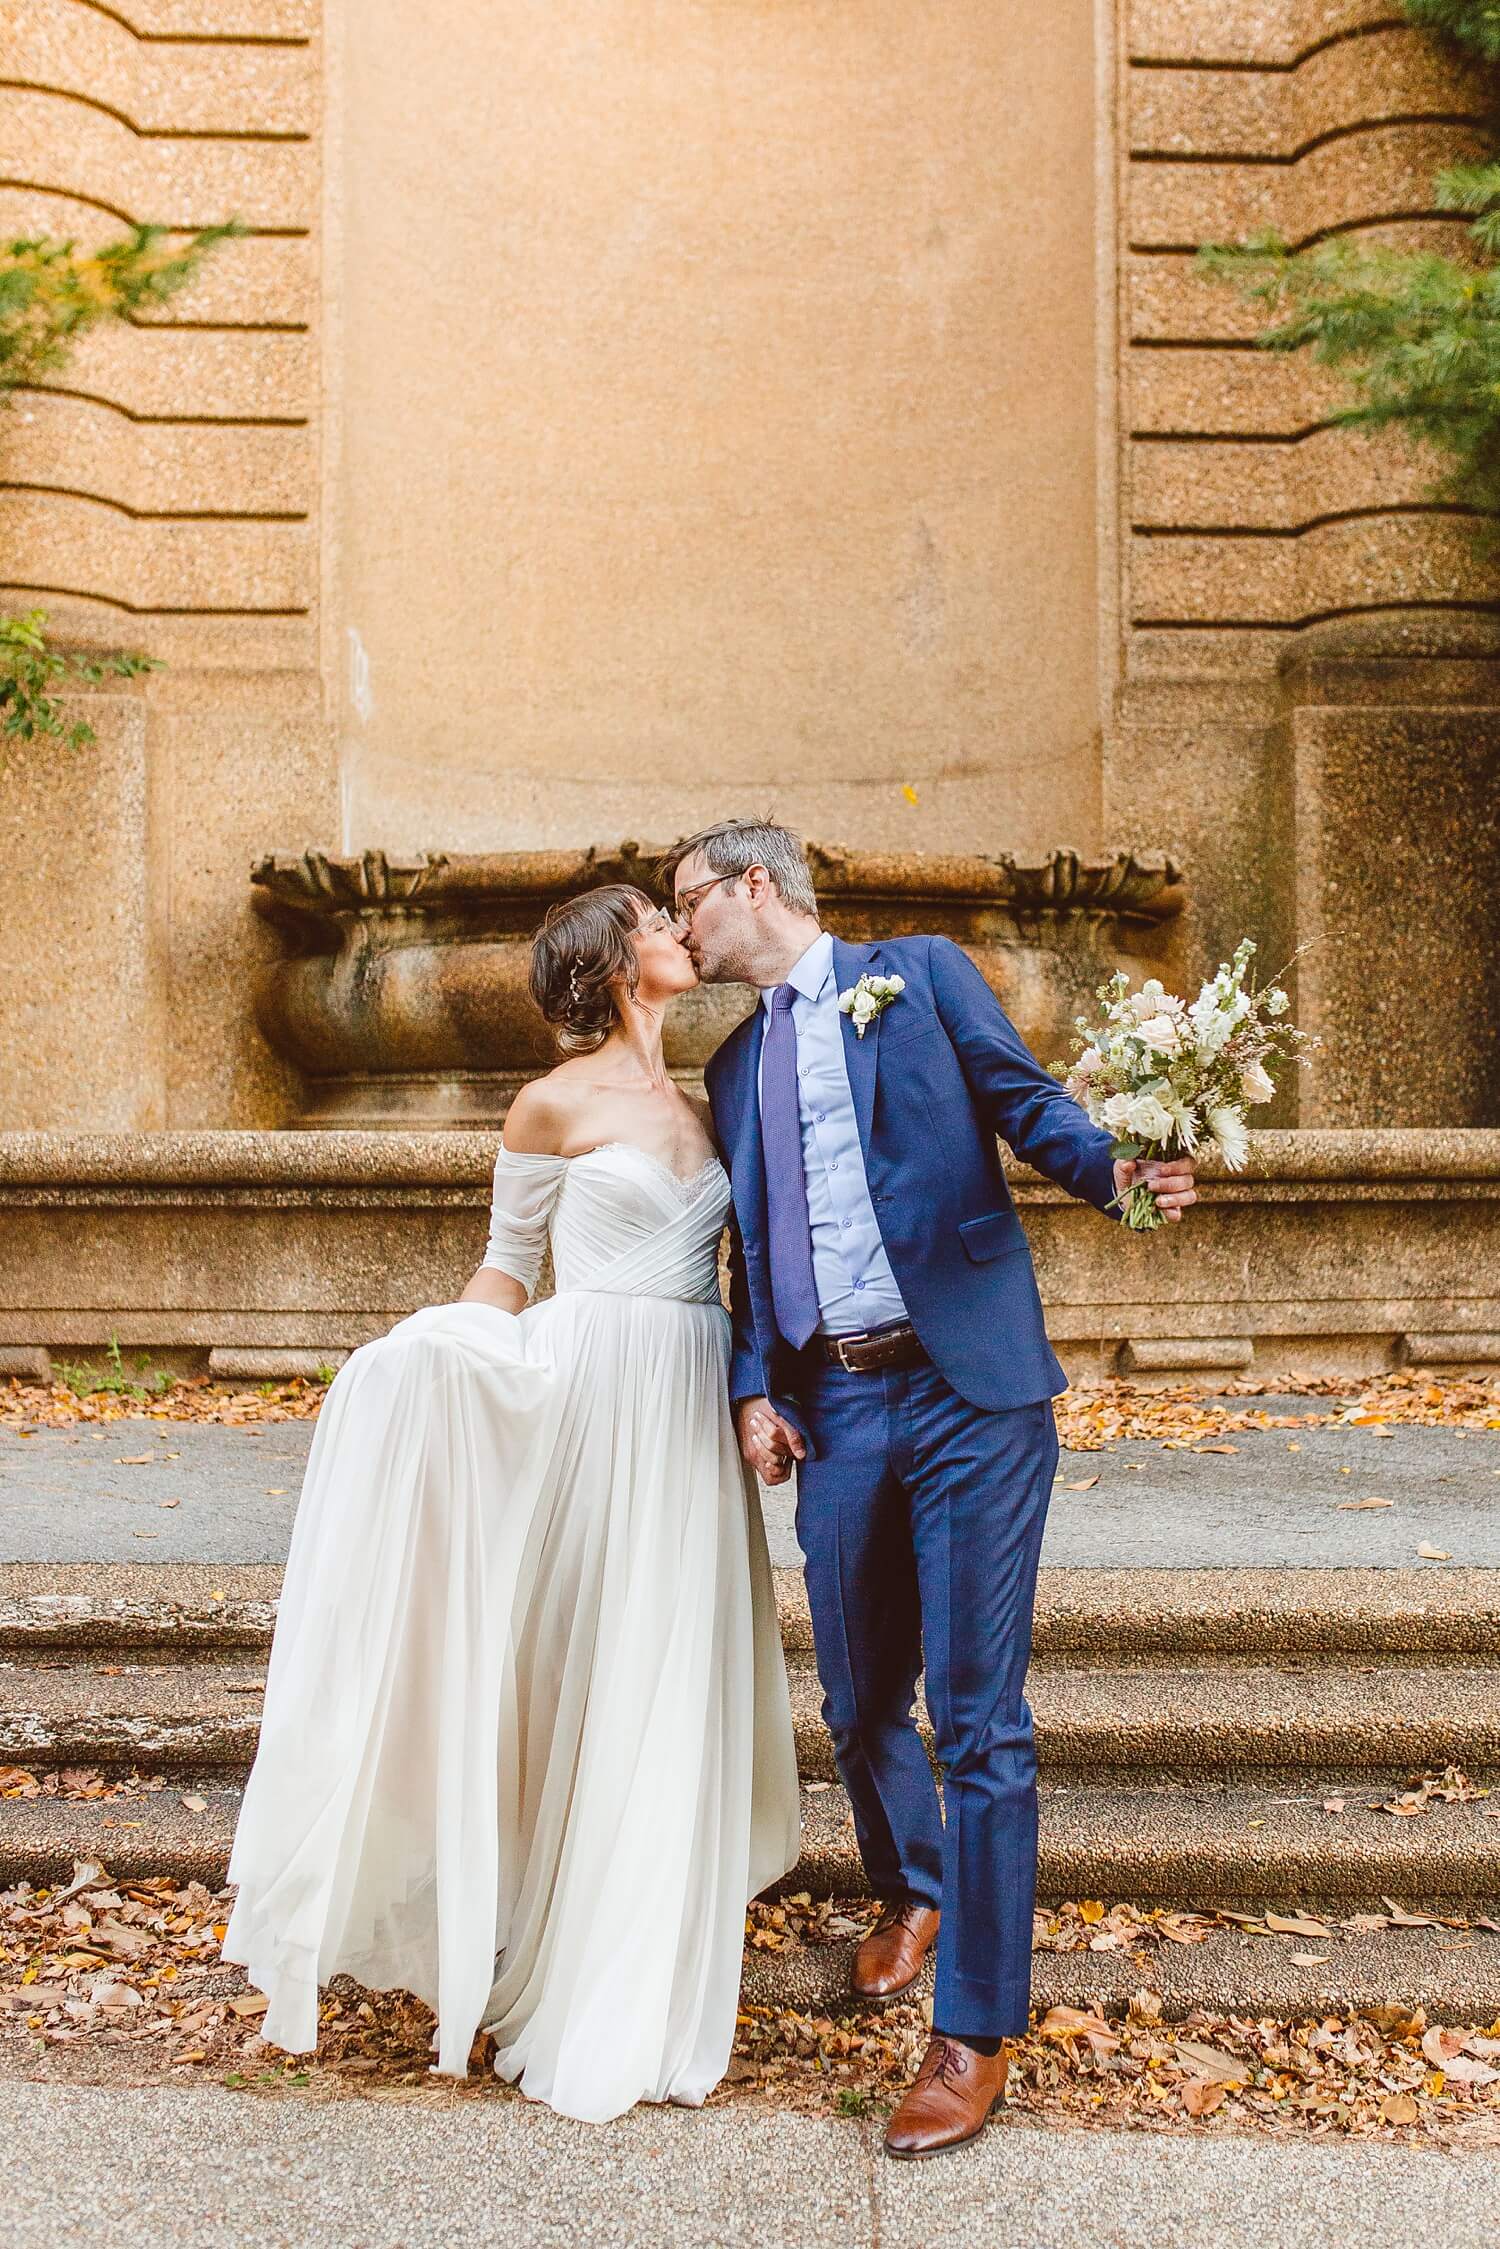 Bride and groom kissing while groom holds bouquet | Brooke Michelle Photography